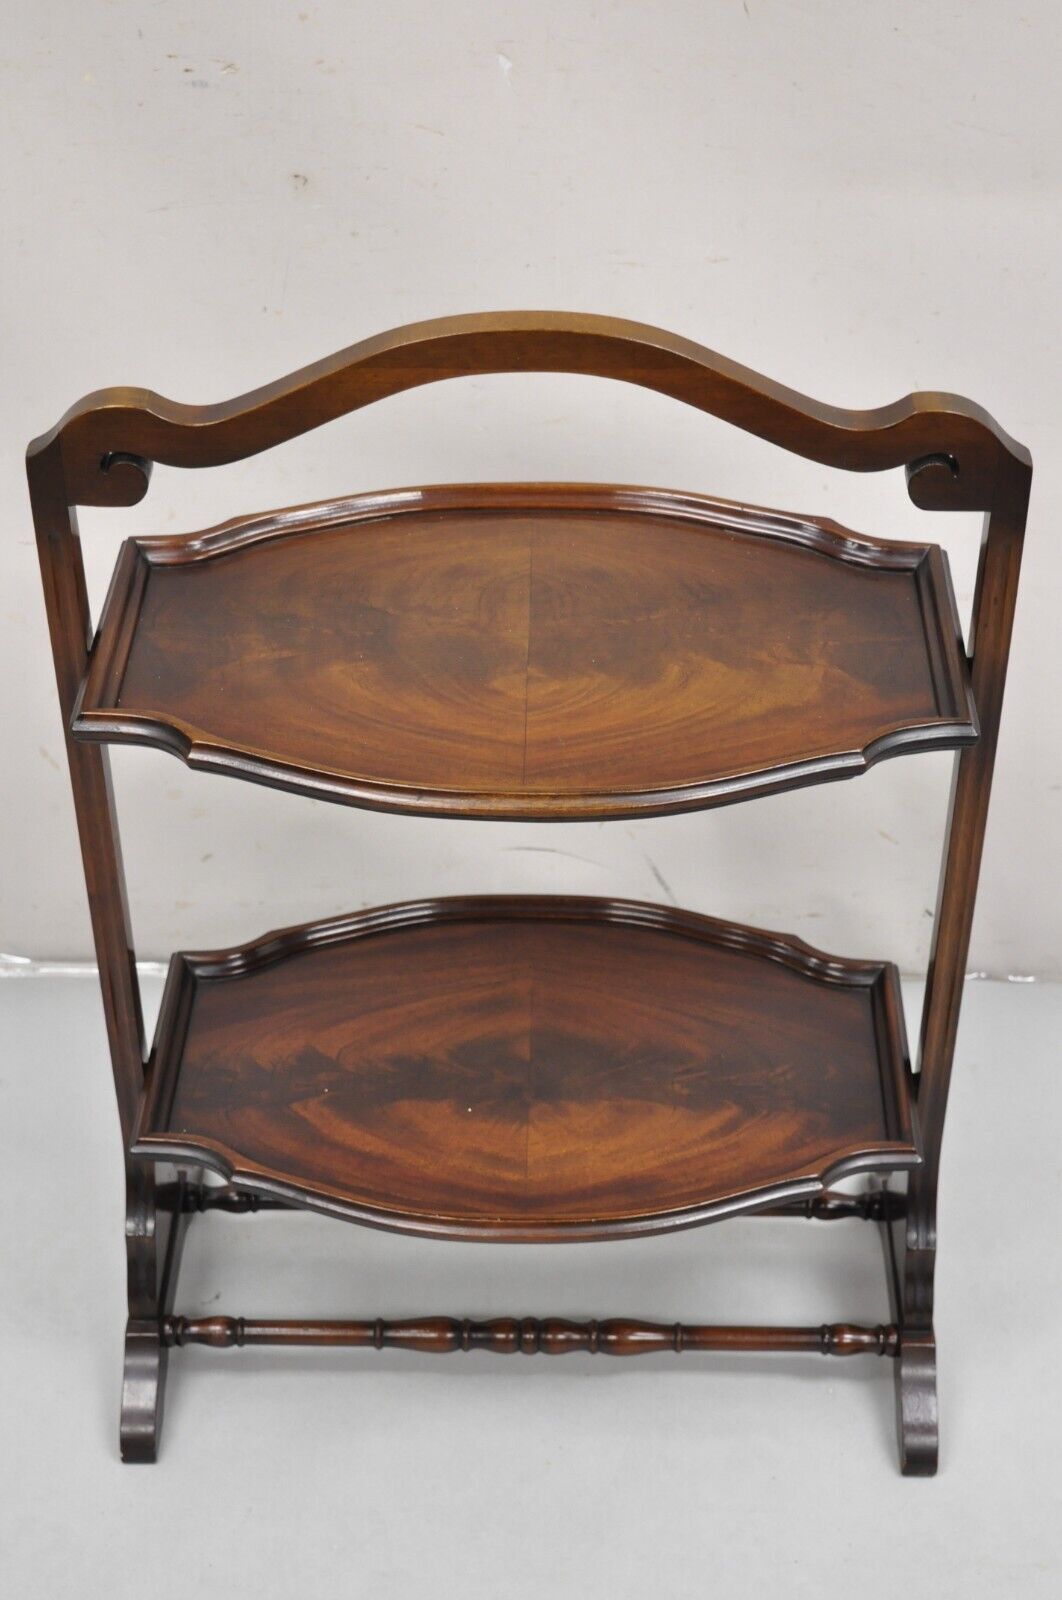 Vintage Regency Style Mahogany 2 Tier Folding Muffin Cake Stand Side Table